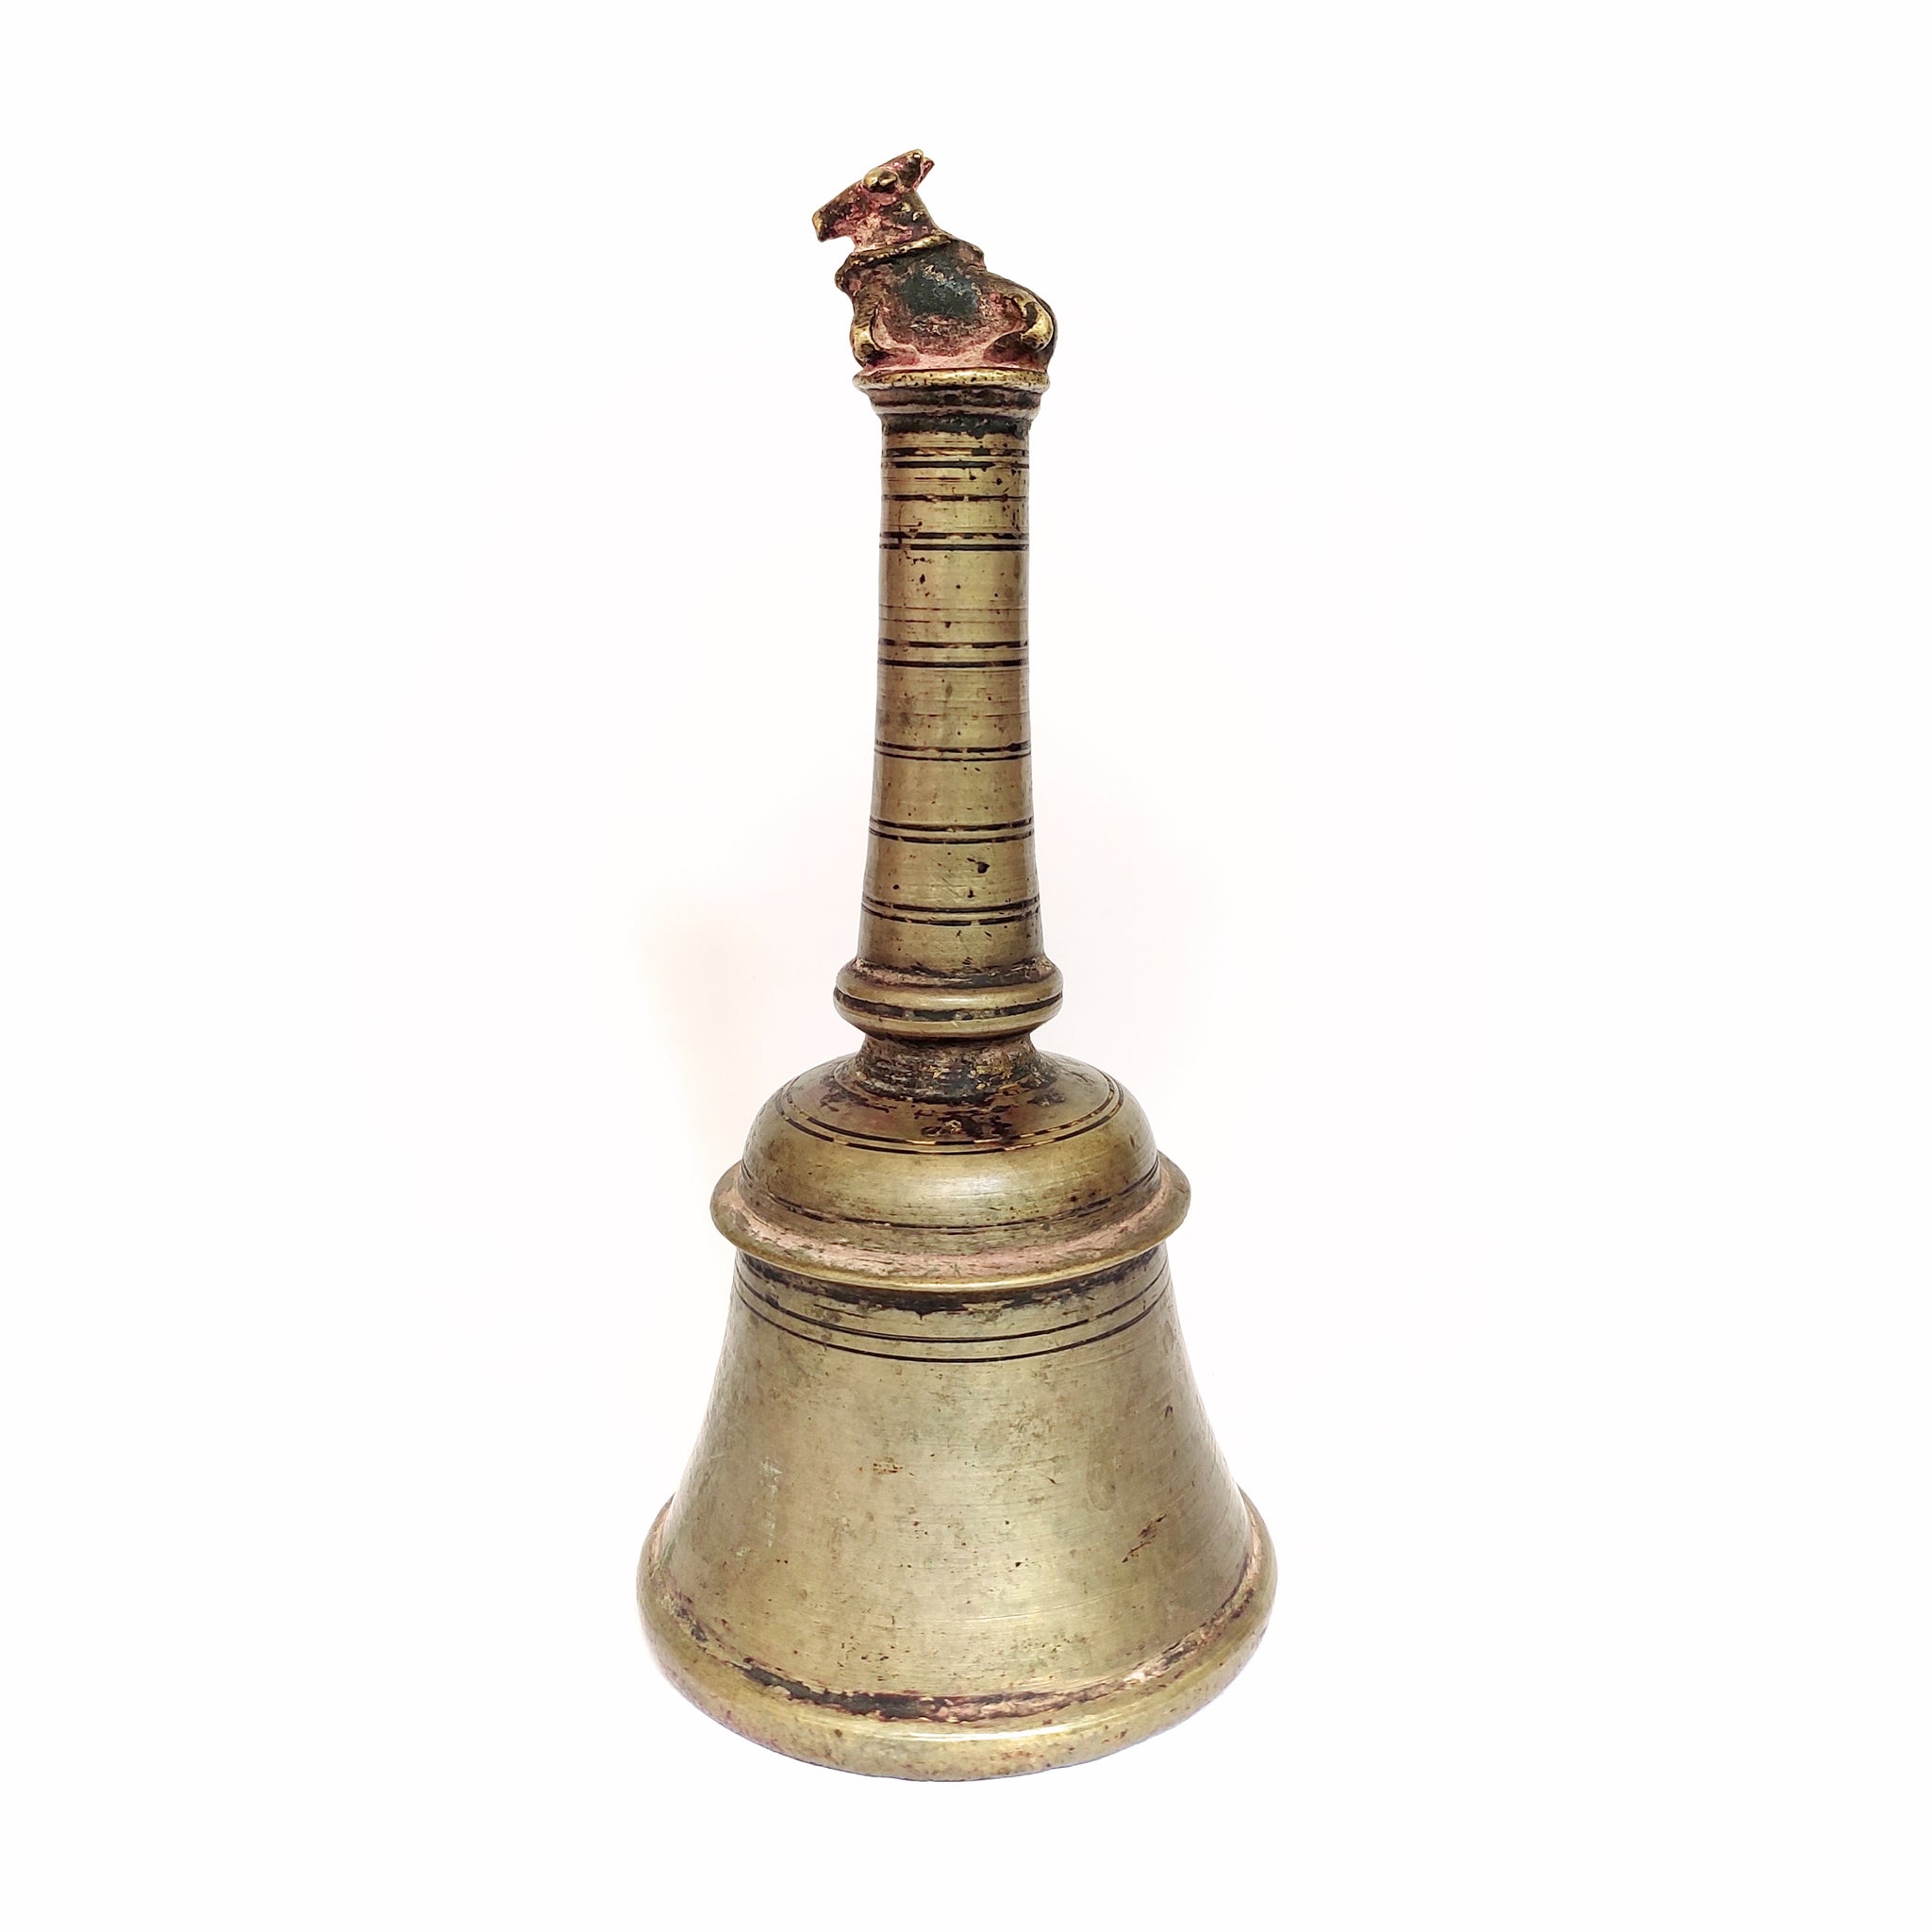 Handcrafted | Panchaloha | Antique bell | The Antique Story